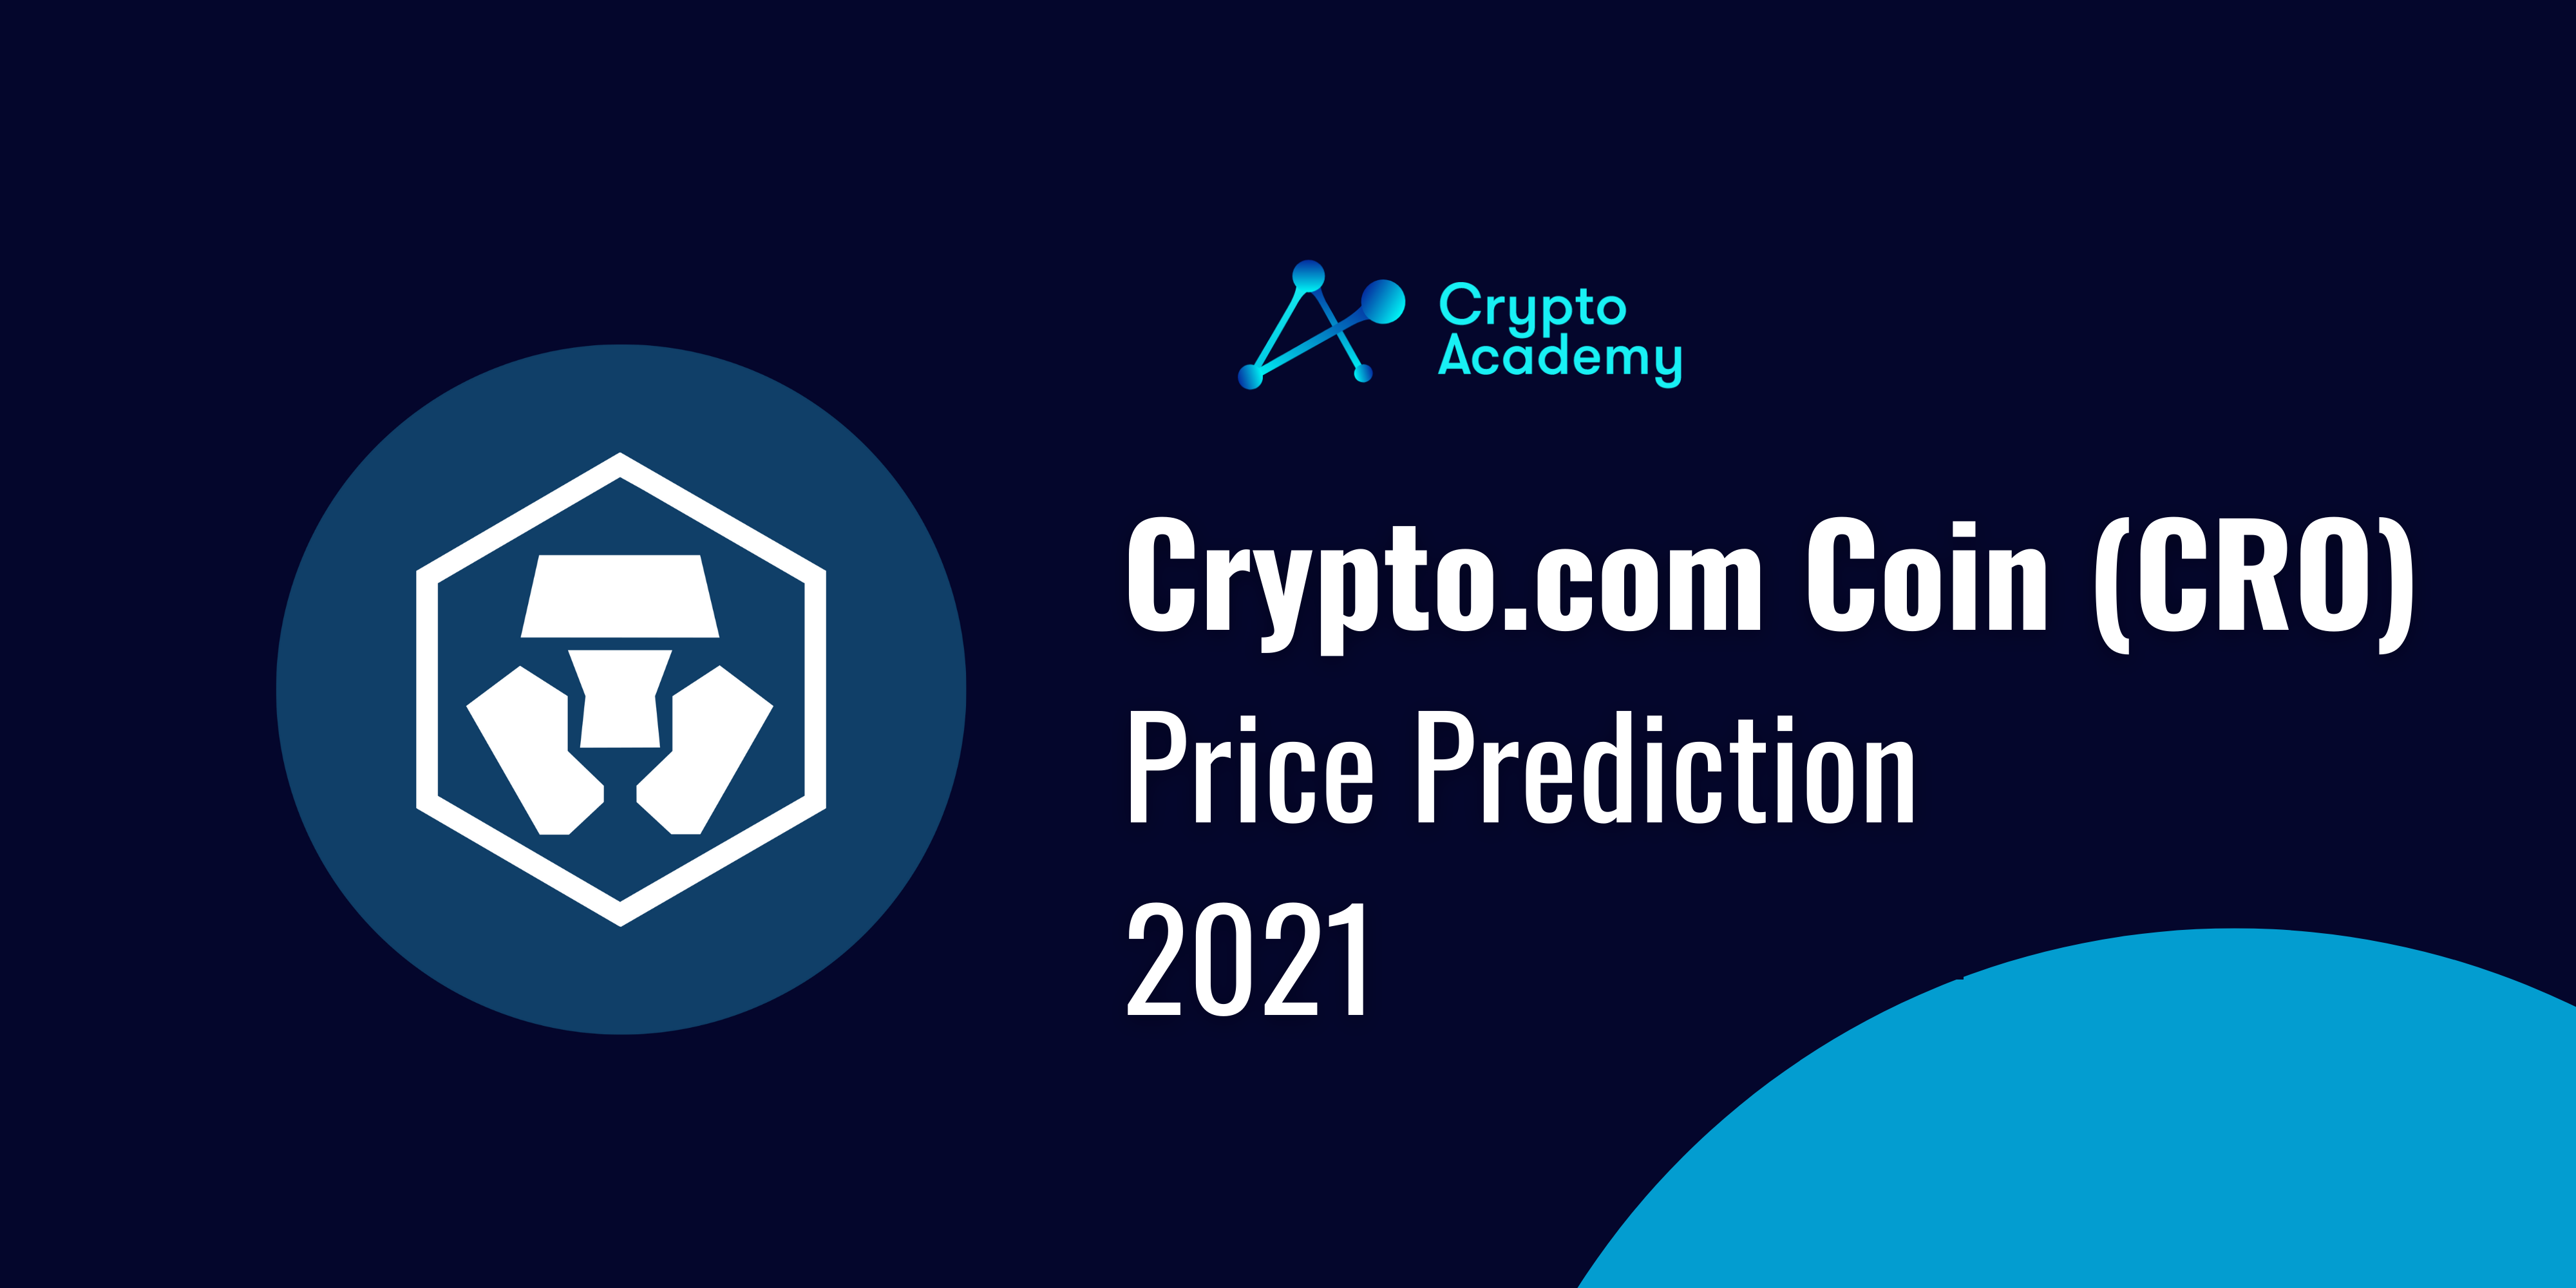 Crypto.com Coin Price Prediction 2021 and Beyond – Is CRO a Good Investment?